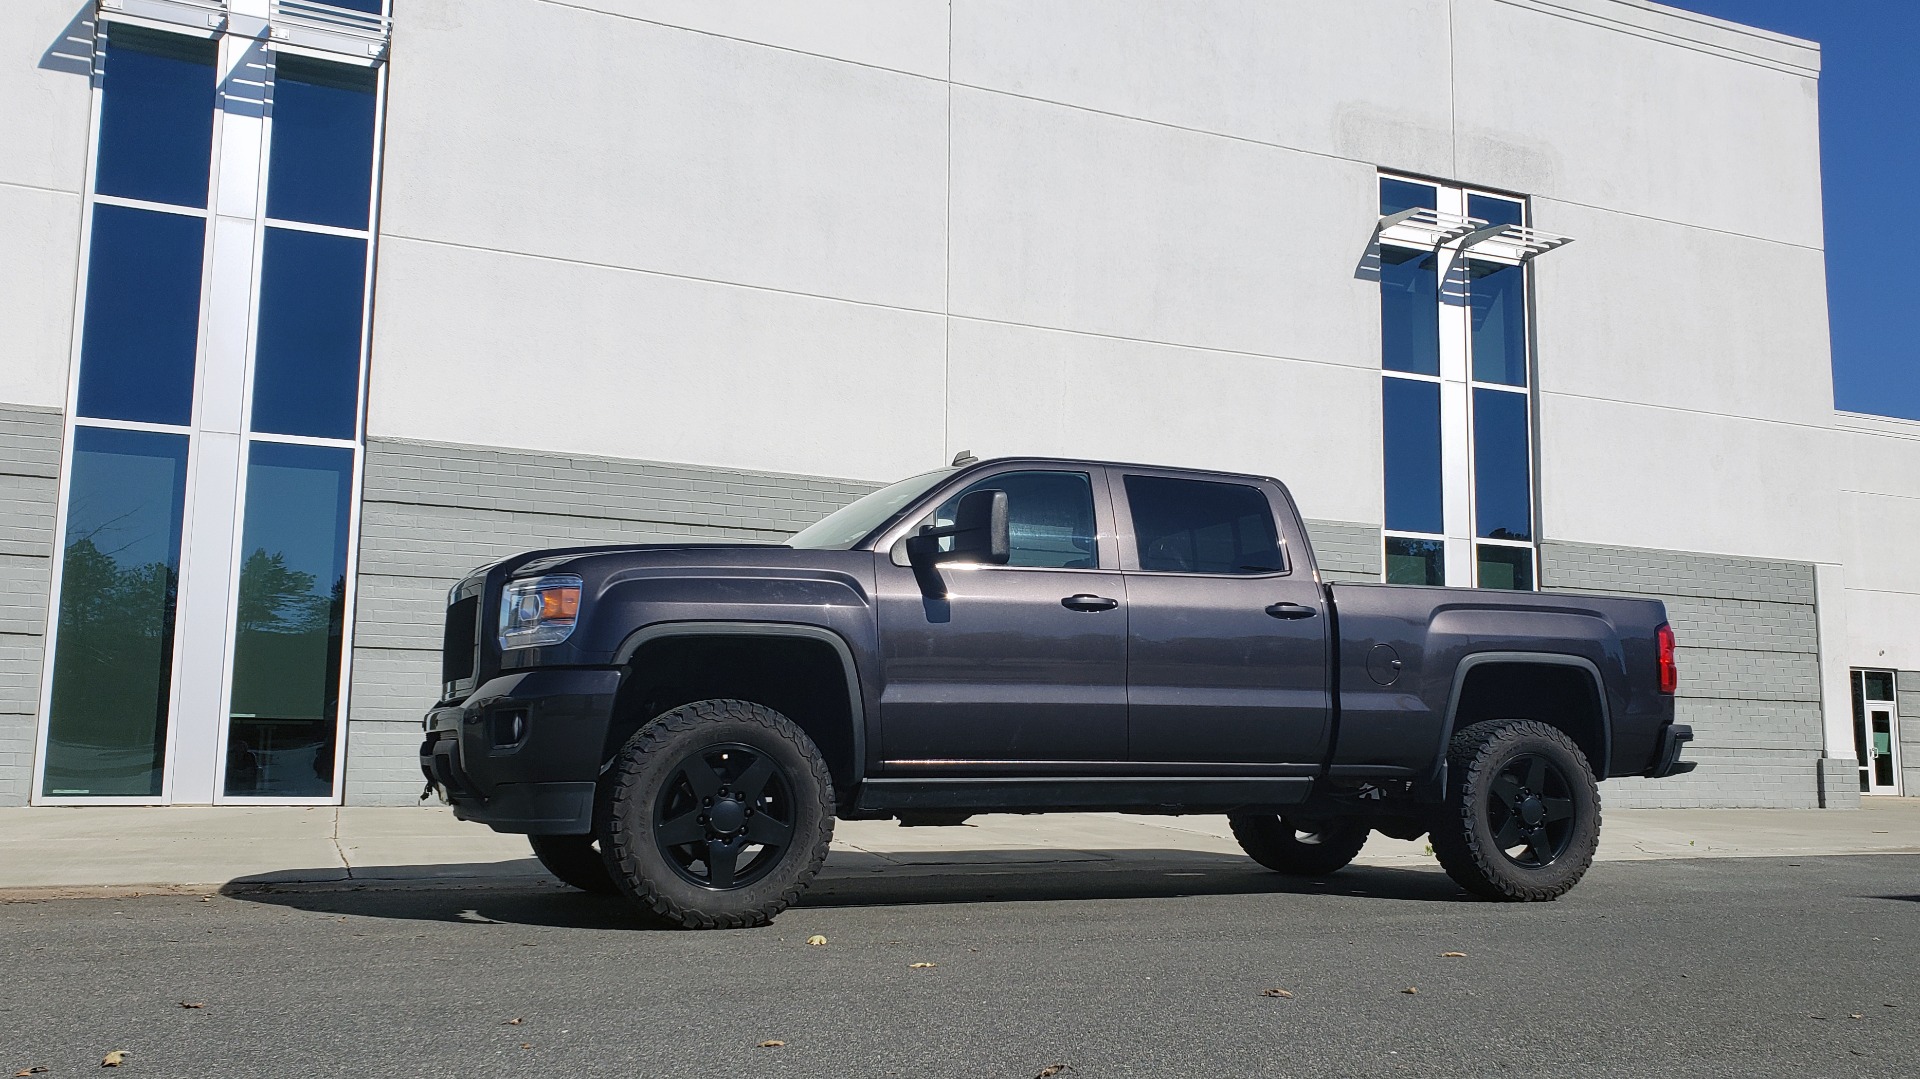 Used 2015 GMC SIERRA 2500HD DENALI 4WD CREWCAB / 6.6L DURAMAX / 6-SPD AUTO / NAV / BOSE for sale Sold at Formula Imports in Charlotte NC 28227 7